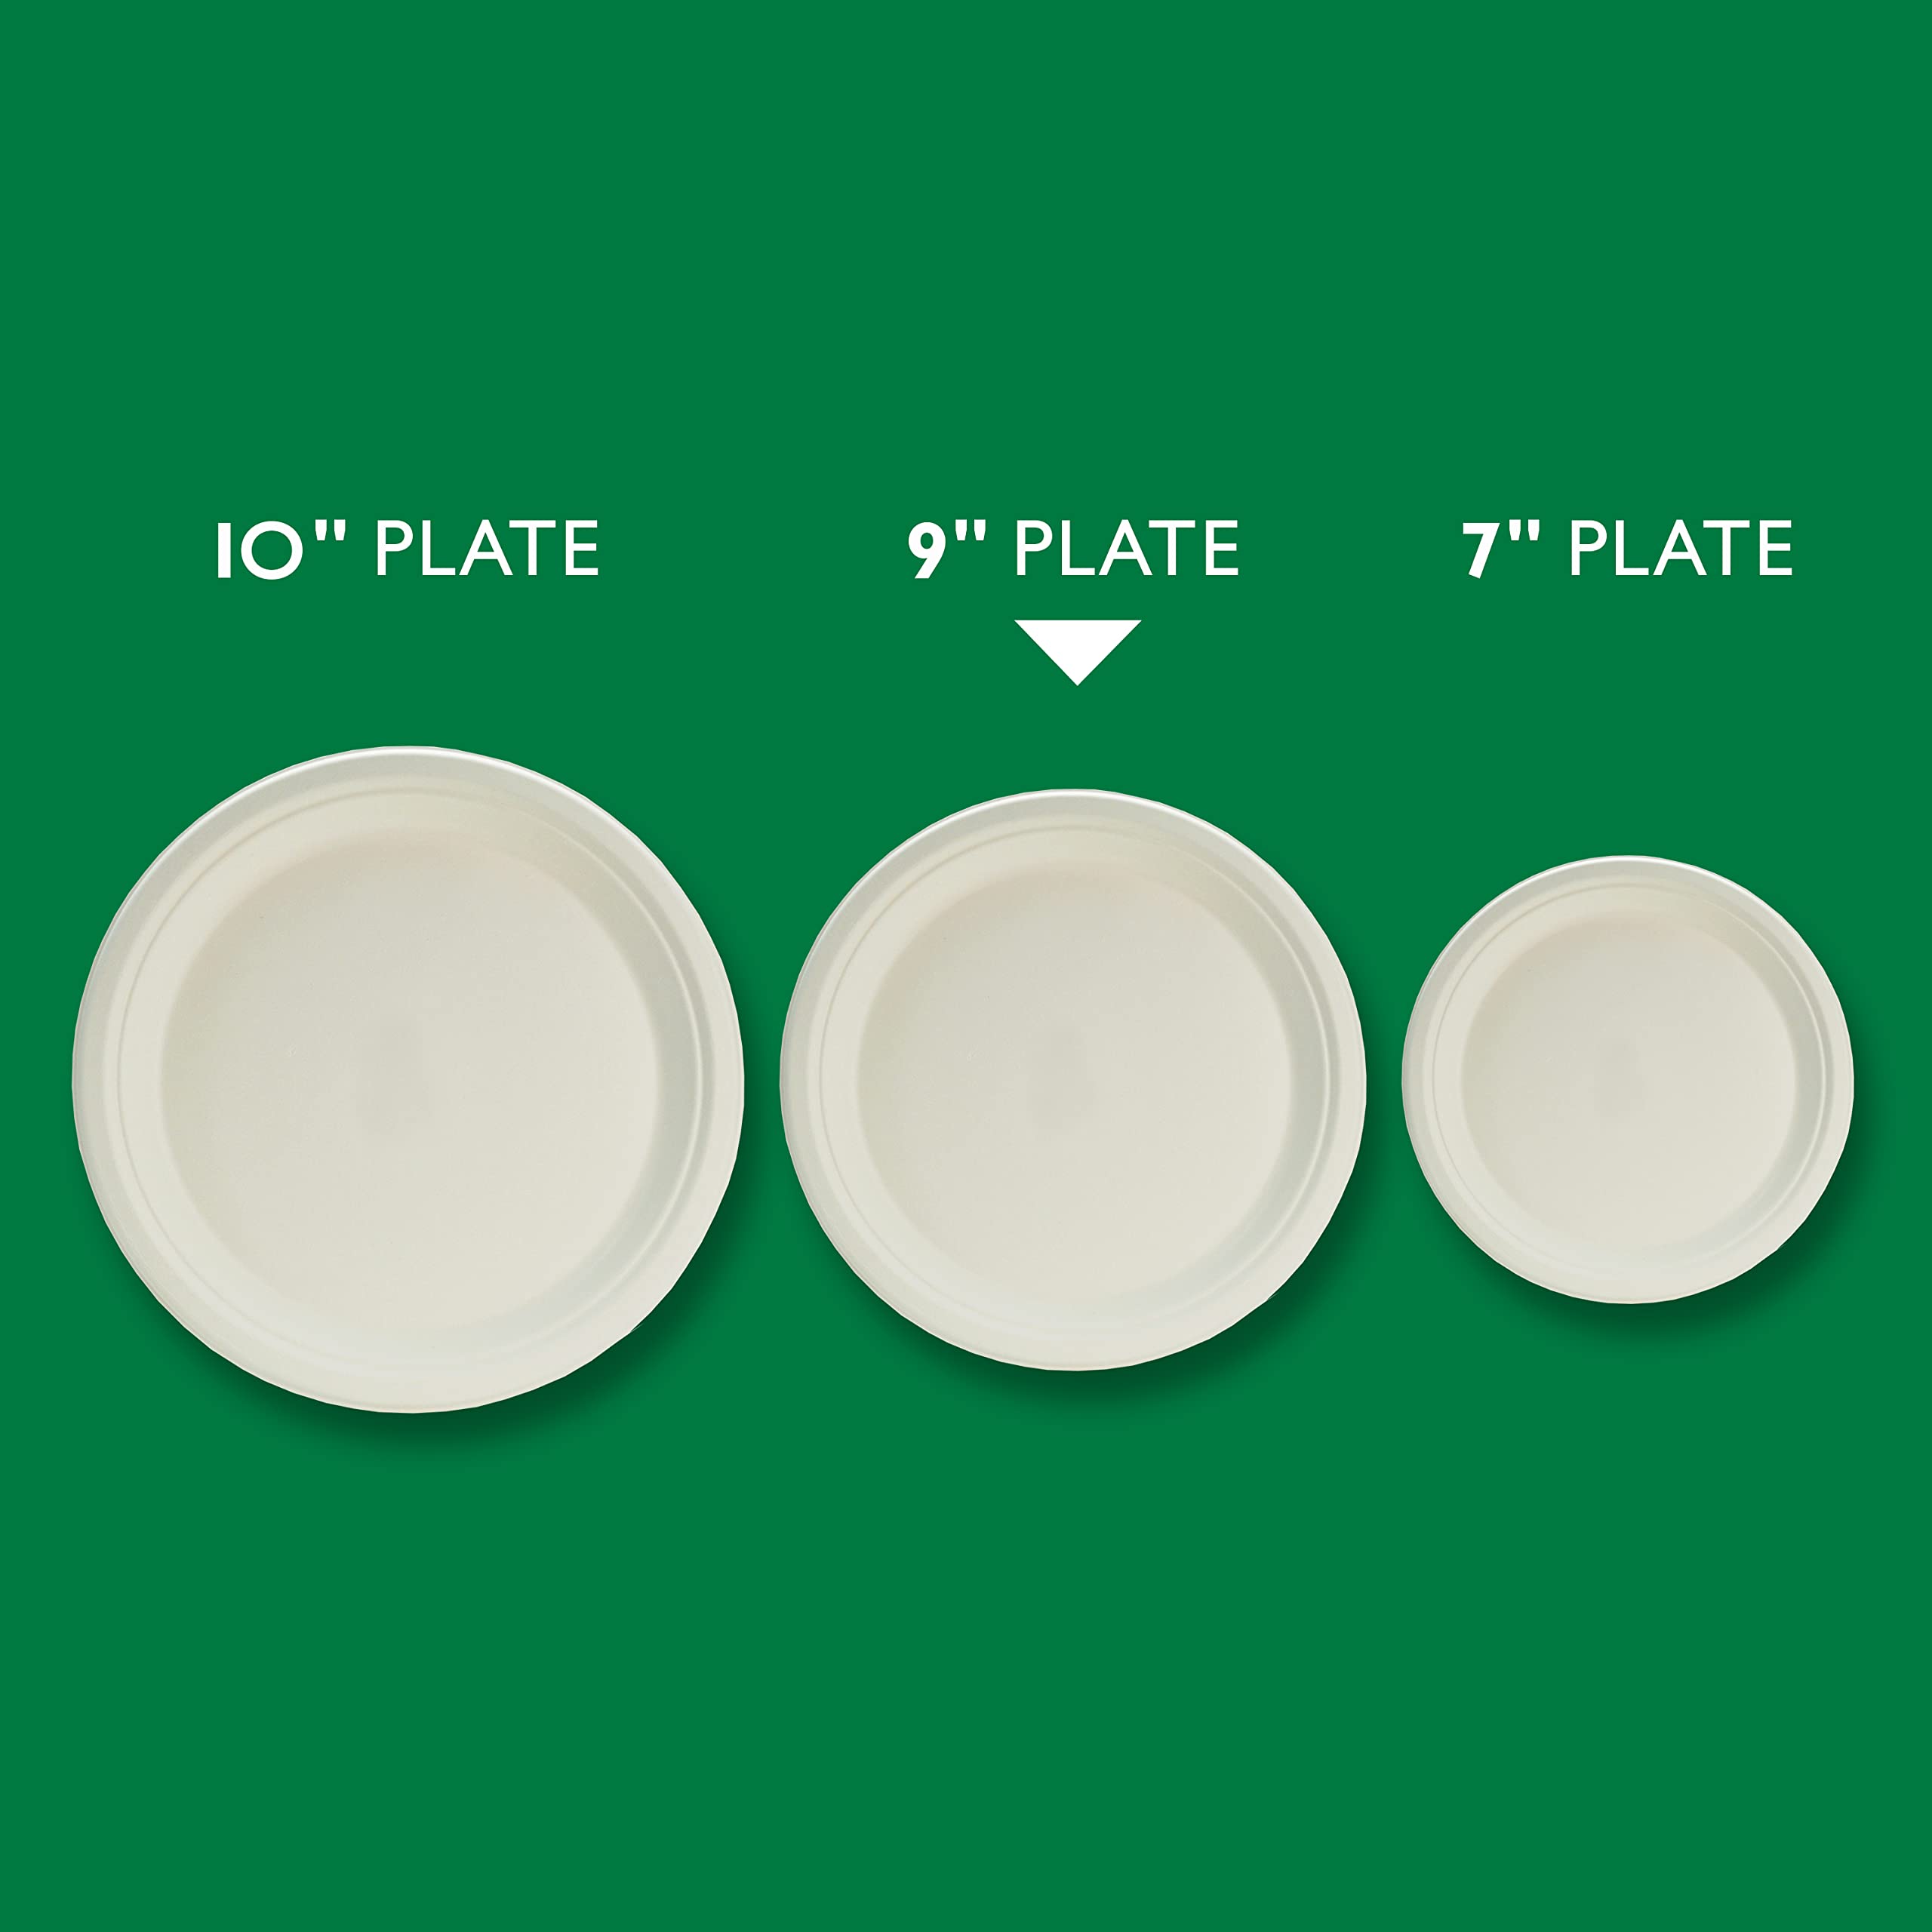 Hefty ECOSAVE Compostable Paper Plates (Pack of 2) - image 3 of 7